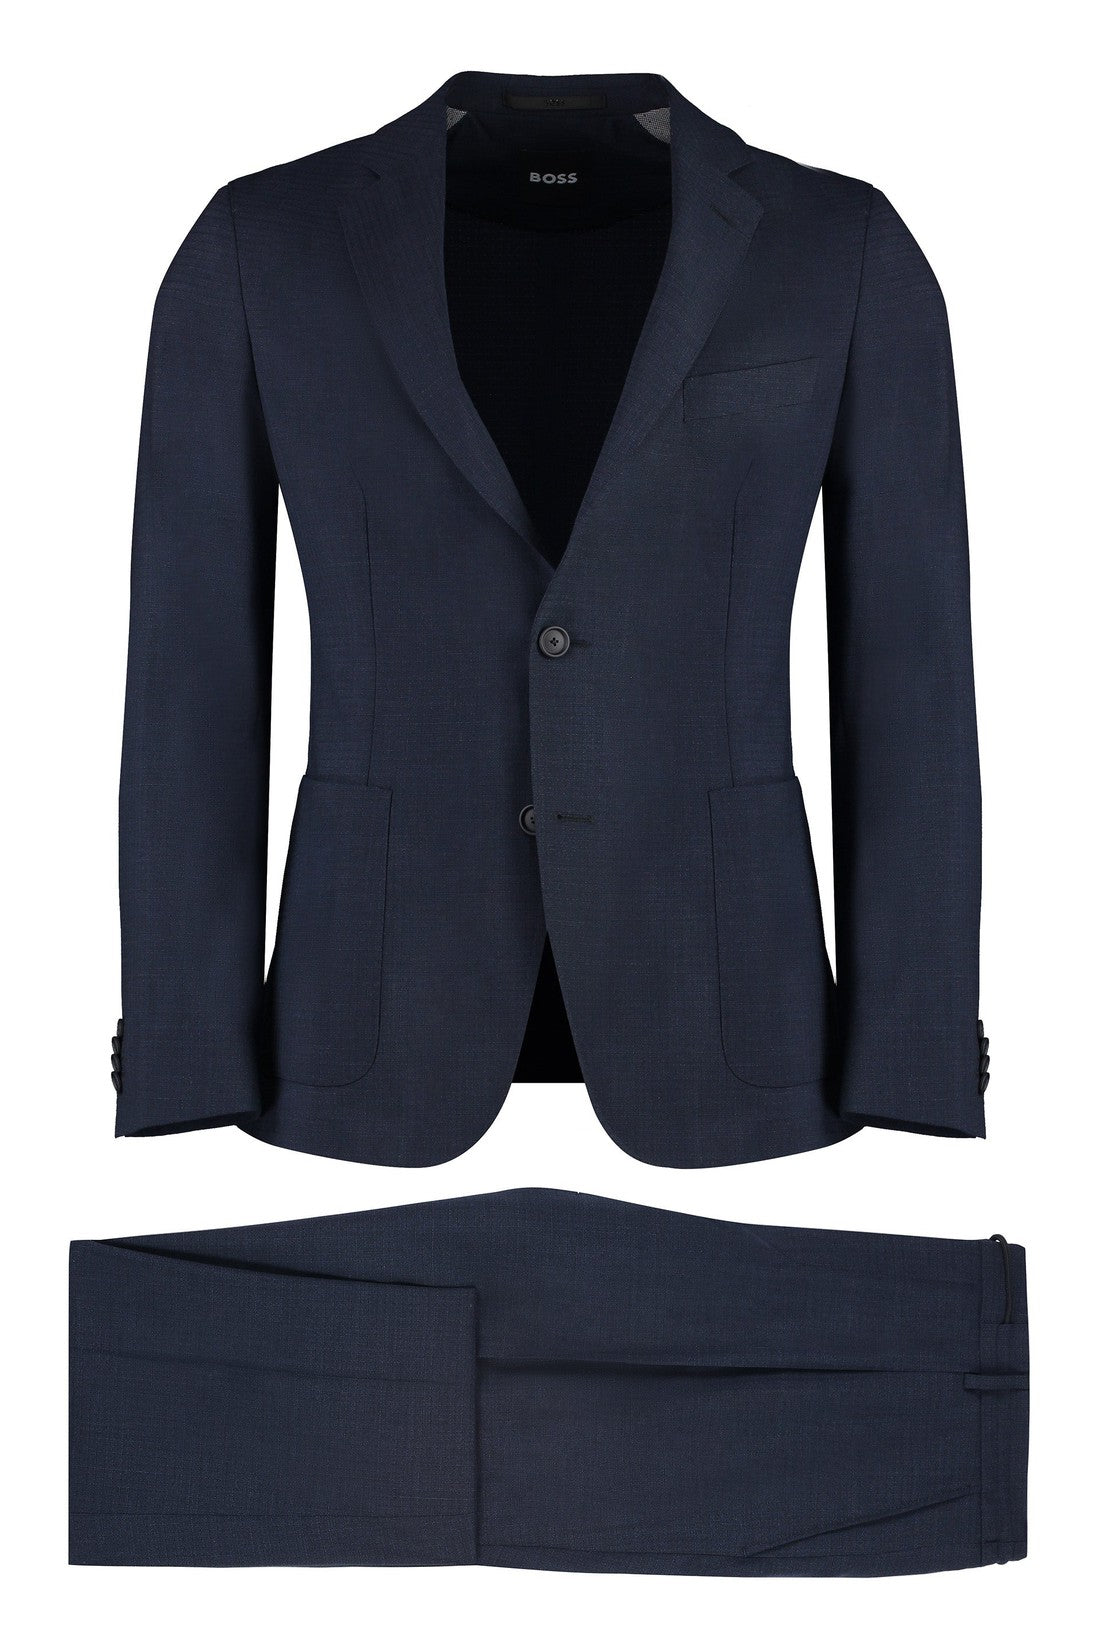 BOSS-OUTLET-SALE-Mixed wool two-pieces suit-ARCHIVIST